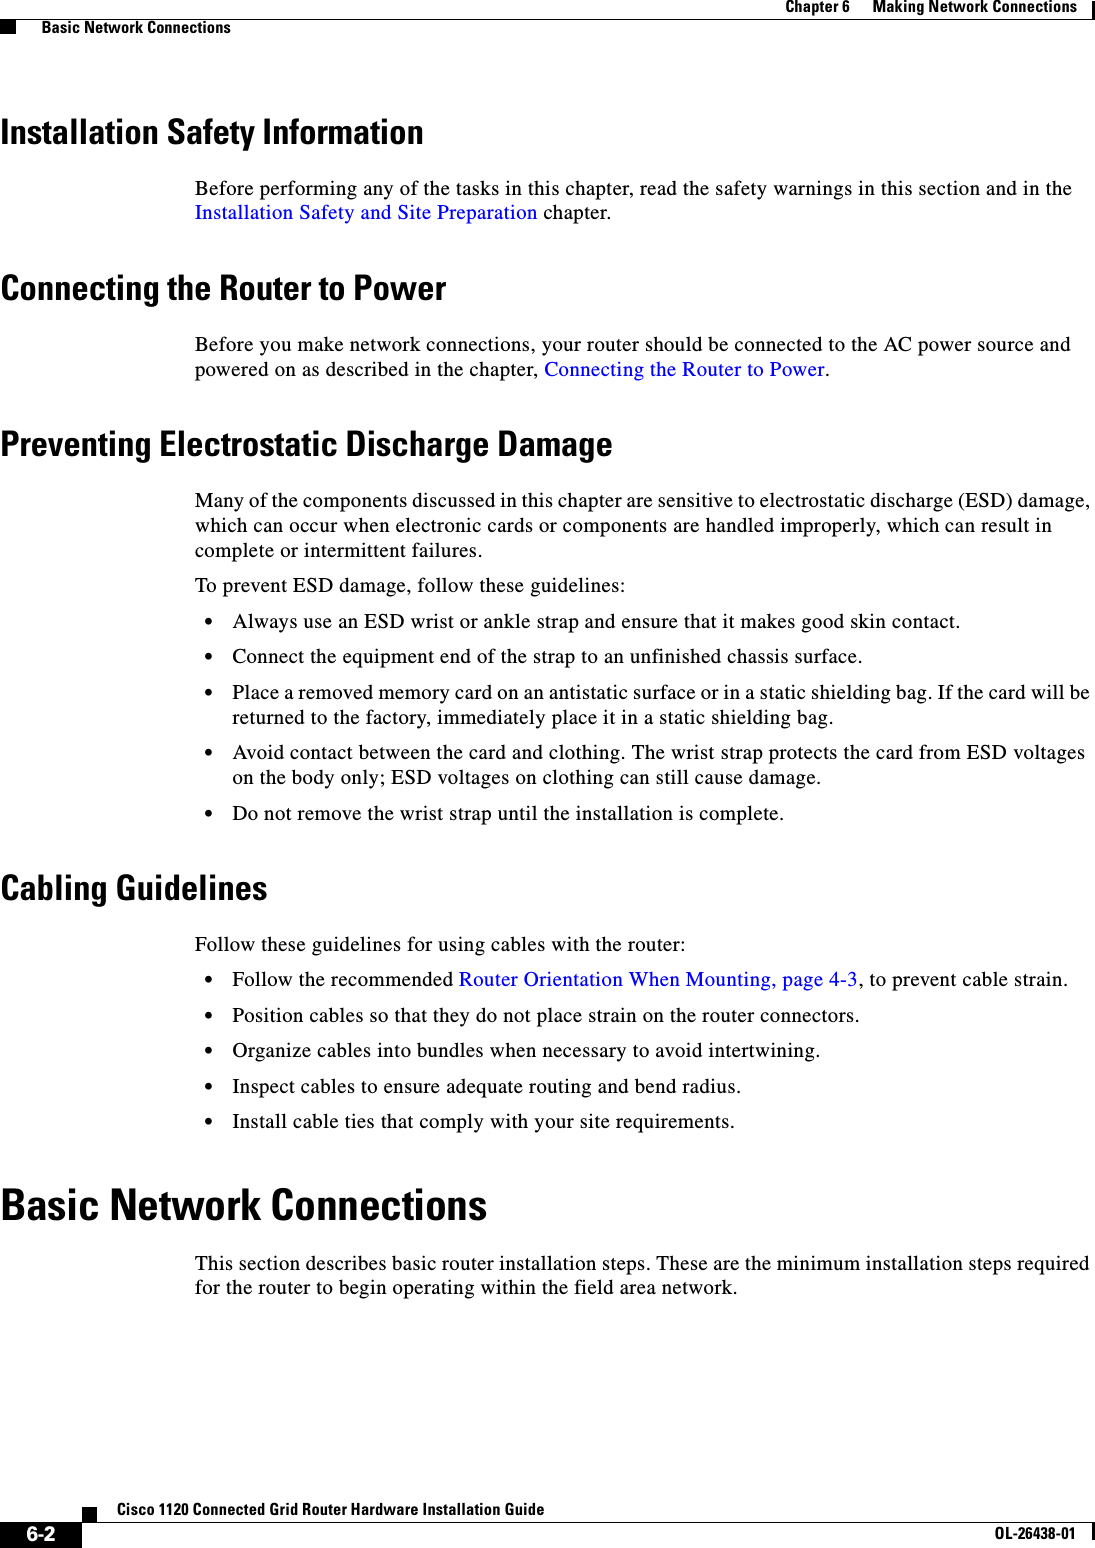  6-2Cisco 1120 Connected Grid Router Hardware Installation GuideOL-26438-01Chapter 6      Making Network Connections  Basic Network ConnectionsInstallation Safety InformationBefore performing any of the tasks in this chapter, read the safety warnings in this section and in the Installation Safety and Site Preparation chapter.Connecting the Router to PowerBefore you make network connections, your router should be connected to the AC power source and powered on as described in the chapter, Connecting the Router to Power.Preventing Electrostatic Discharge DamageMany of the components discussed in this chapter are sensitive to electrostatic discharge (ESD) damage, which can occur when electronic cards or components are handled improperly, which can result in complete or intermittent failures.To prevent ESD damage, follow these guidelines:•Always use an ESD wrist or ankle strap and ensure that it makes good skin contact.•Connect the equipment end of the strap to an unfinished chassis surface.•Place a removed memory card on an antistatic surface or in a static shielding bag. If the card will be returned to the factory, immediately place it in a static shielding bag.•Avoid contact between the card and clothing. The wrist strap protects the card from ESD voltages on the body only; ESD voltages on clothing can still cause damage.•Do not remove the wrist strap until the installation is complete.Cabling GuidelinesFollow these guidelines for using cables with the router:•Follow the recommended Router Orientation When Mounting, page 4-3, to prevent cable strain.•Position cables so that they do not place strain on the router connectors.•Organize cables into bundles when necessary to avoid intertwining.•Inspect cables to ensure adequate routing and bend radius. •Install cable ties that comply with your site requirements.Basic Network ConnectionsThis section describes basic router installation steps. These are the minimum installation steps required for the router to begin operating within the field area network.